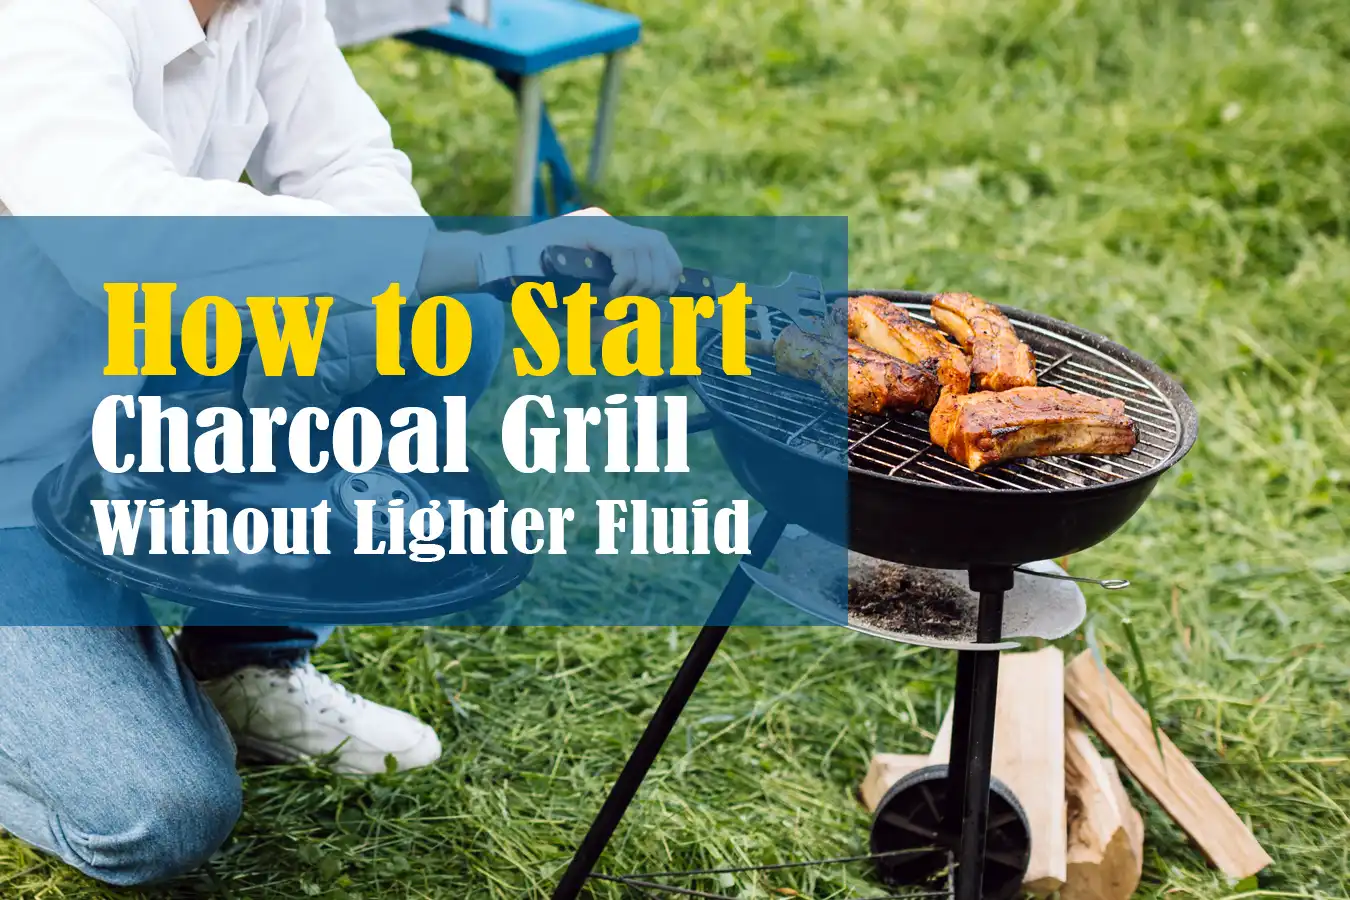 Start Charcoal Grill Without Lighter Fluid